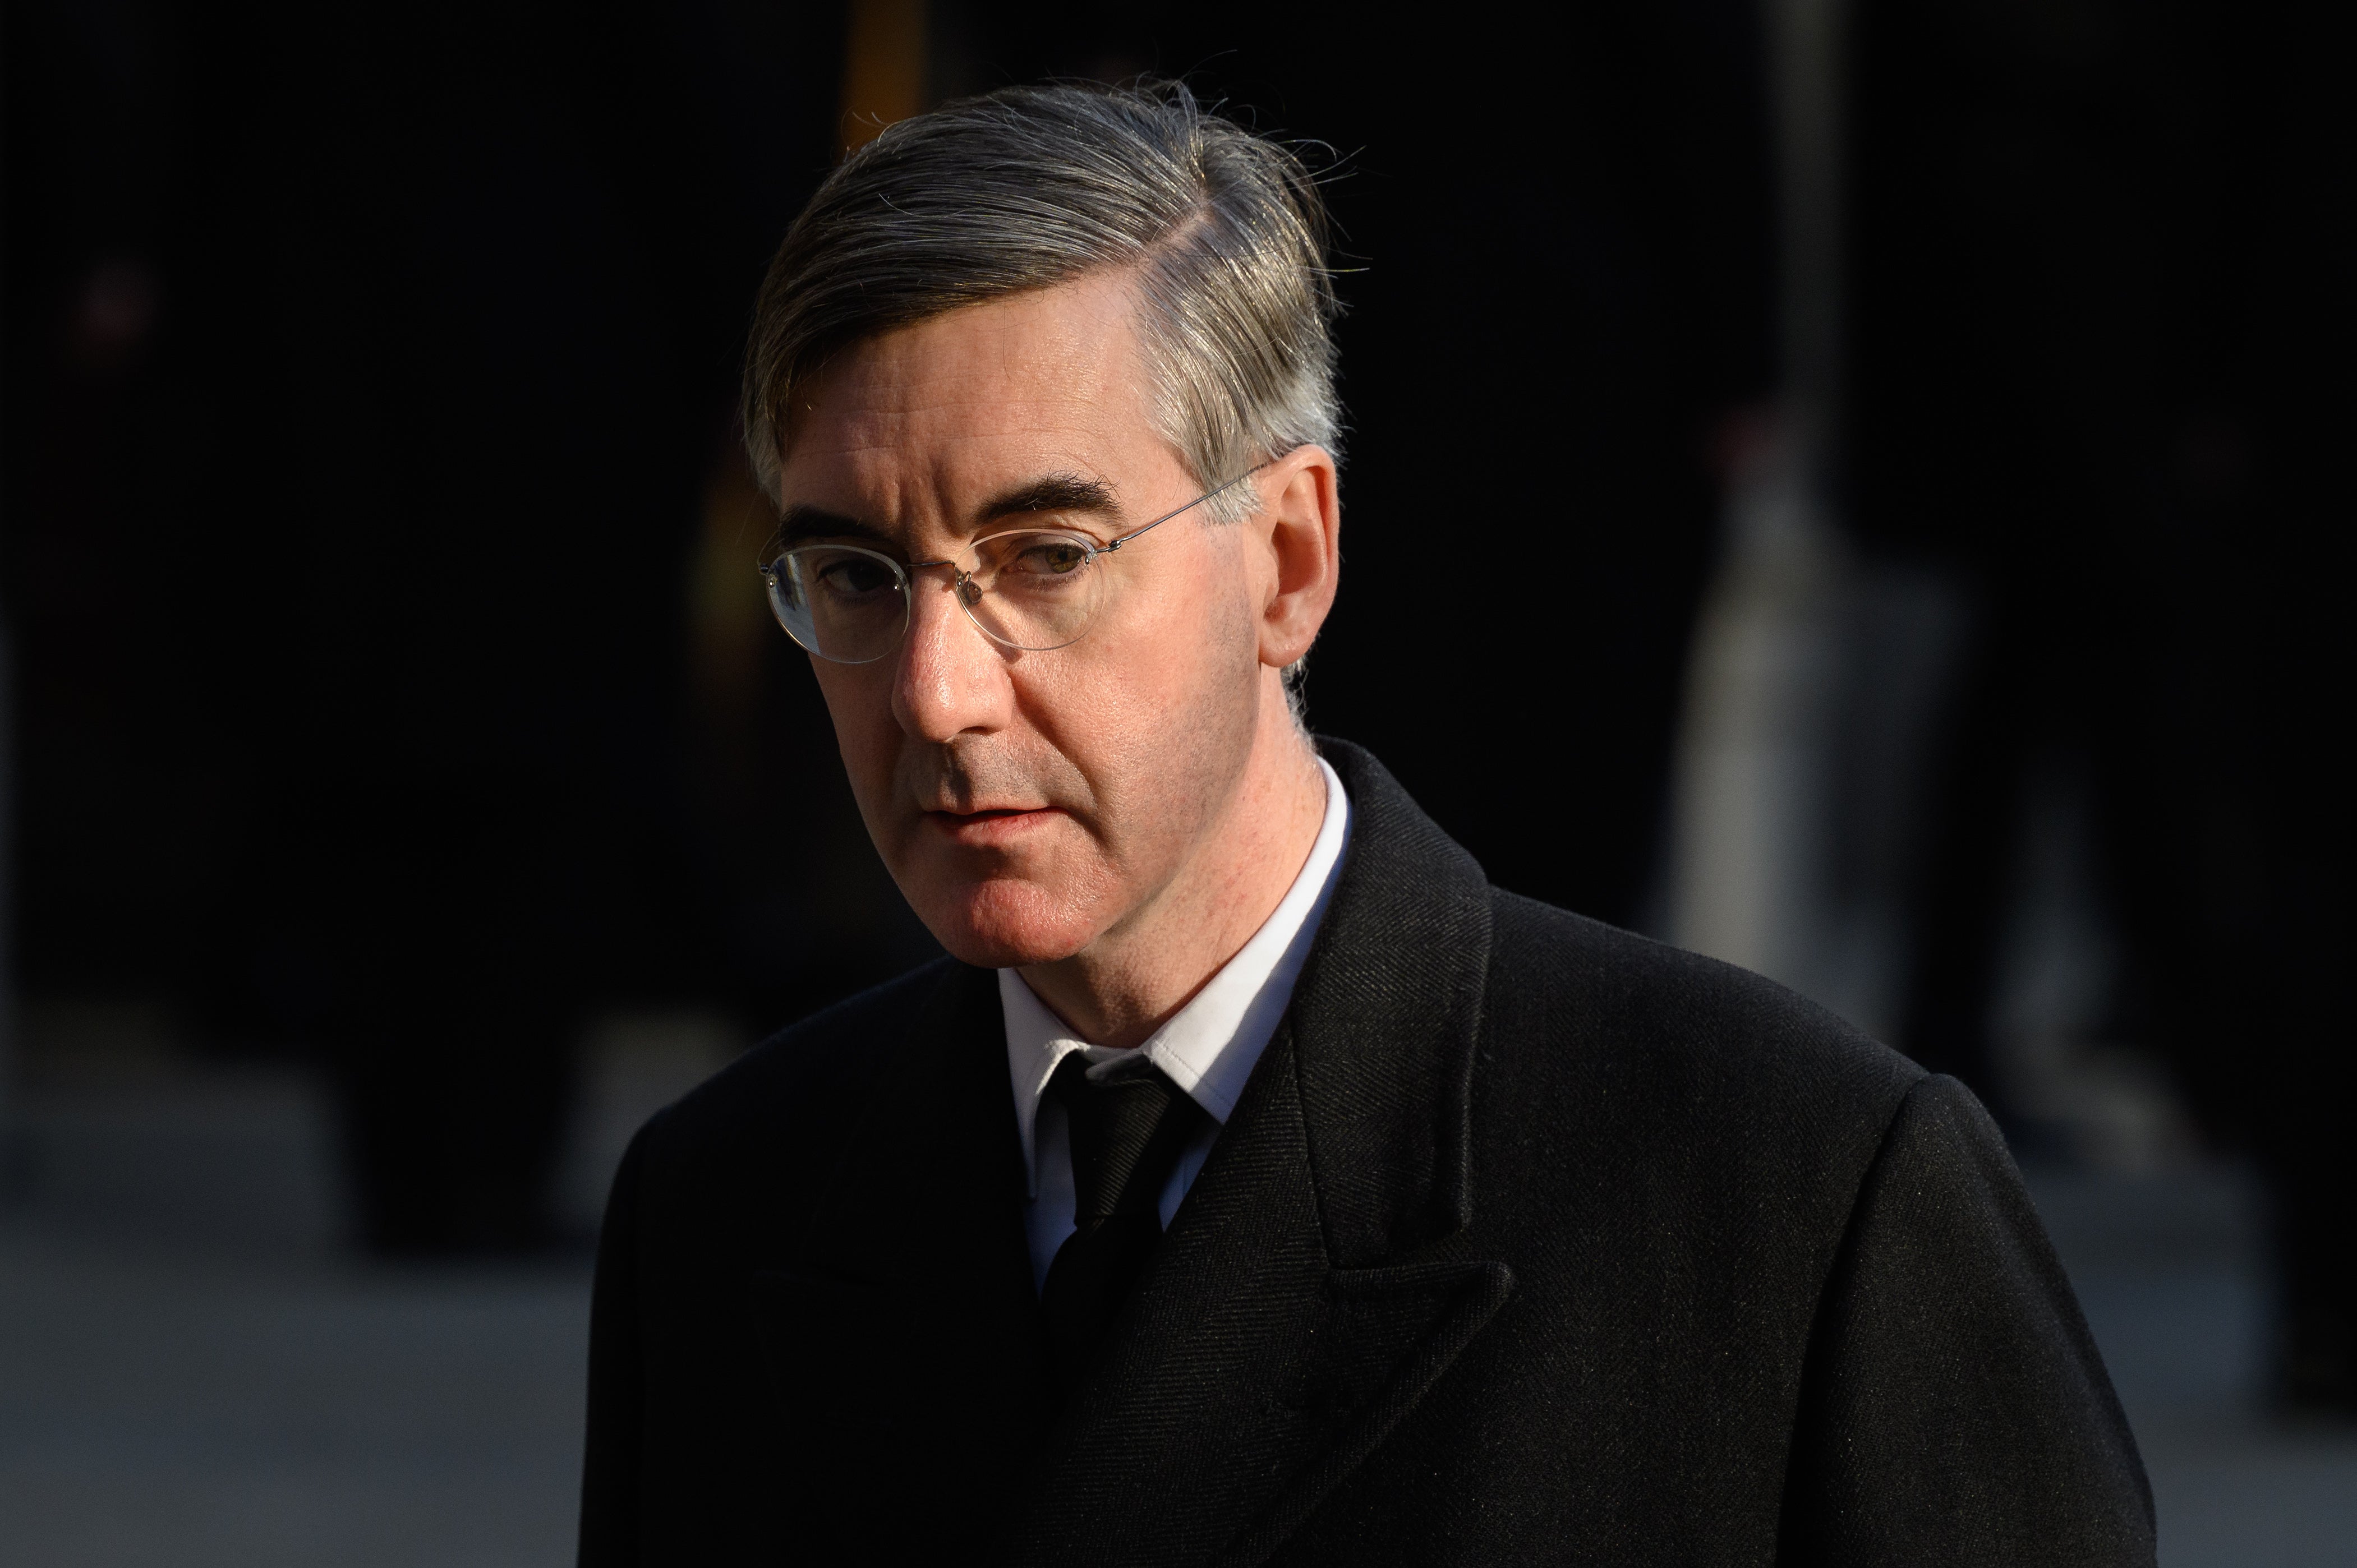 Jacob Rees-Mogg now says that the state must not provide ‘certain functions’ in the post-Brexit era